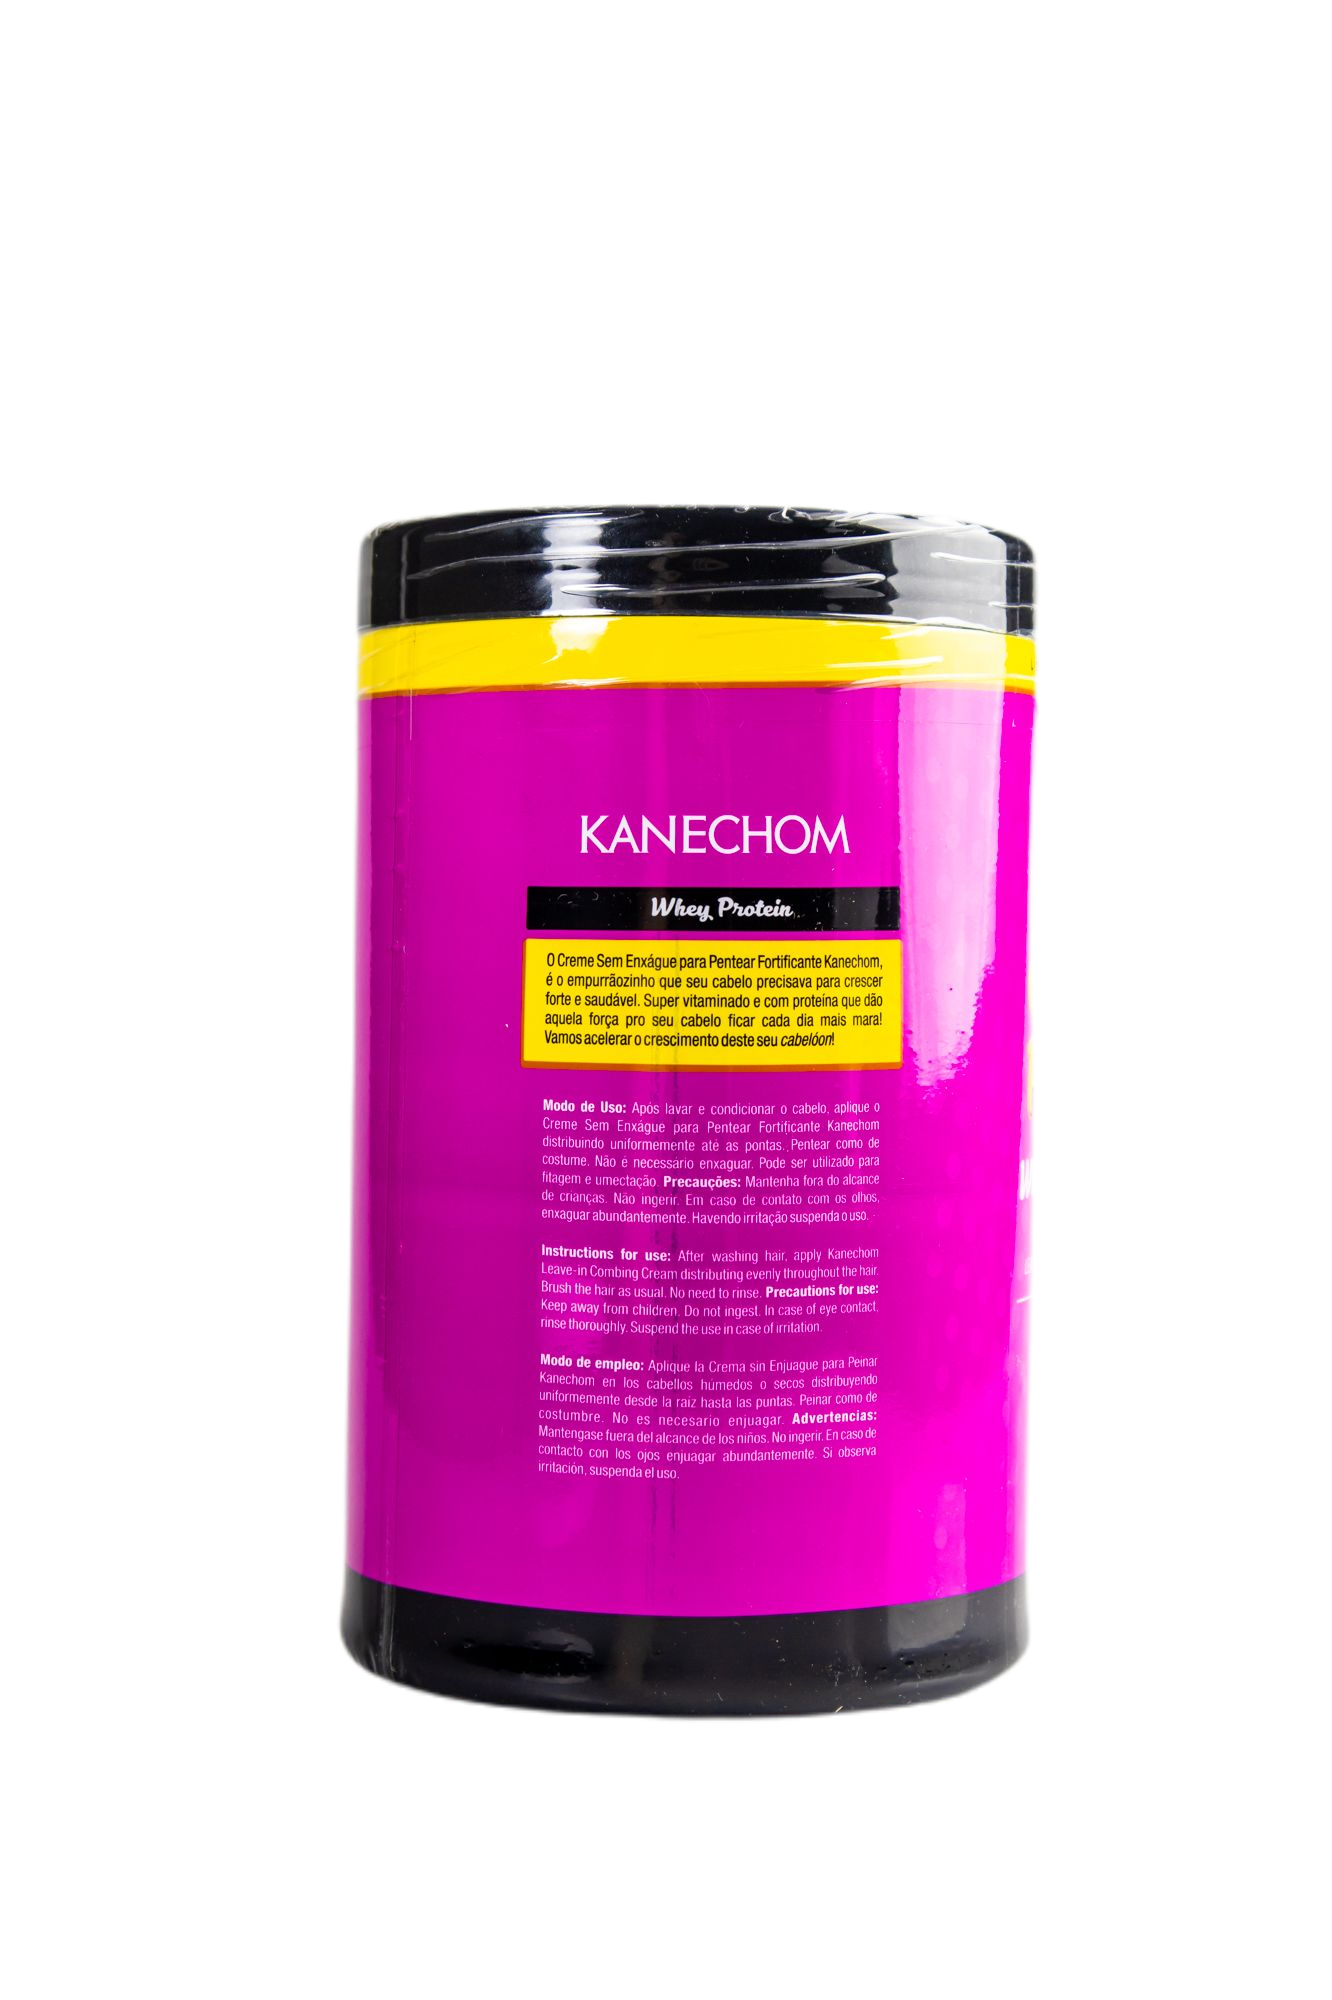 Kanechom Home Care Bombou Whey Protein Vitamins Hair Fortifying Growth Combing Cream 1Kg - Kanechom